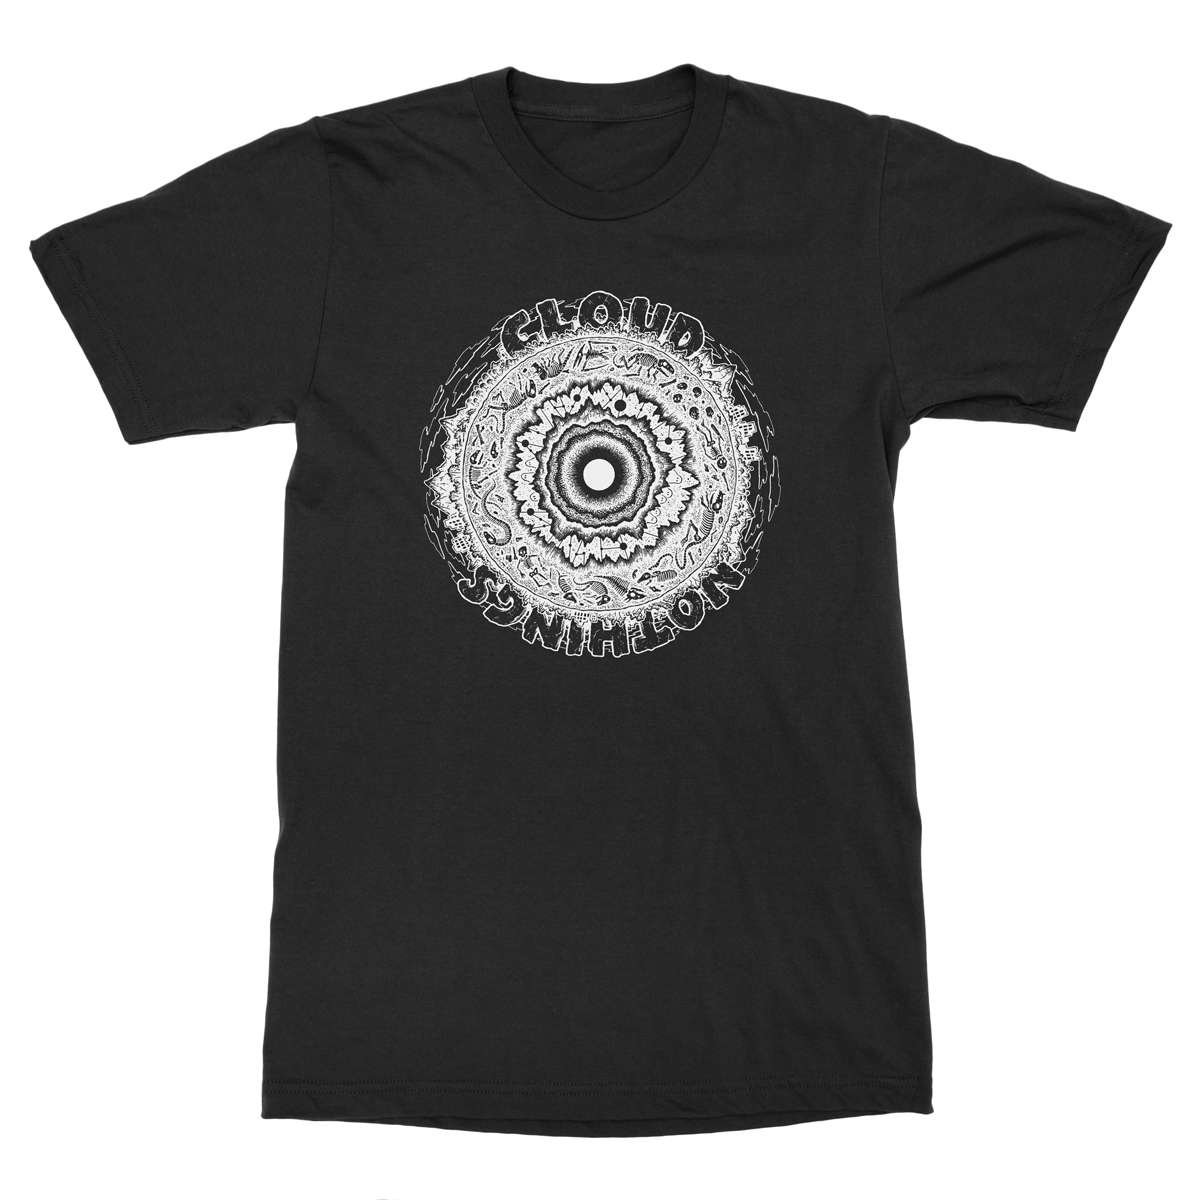 Cloud Nothings Fossils T-shirt- Black